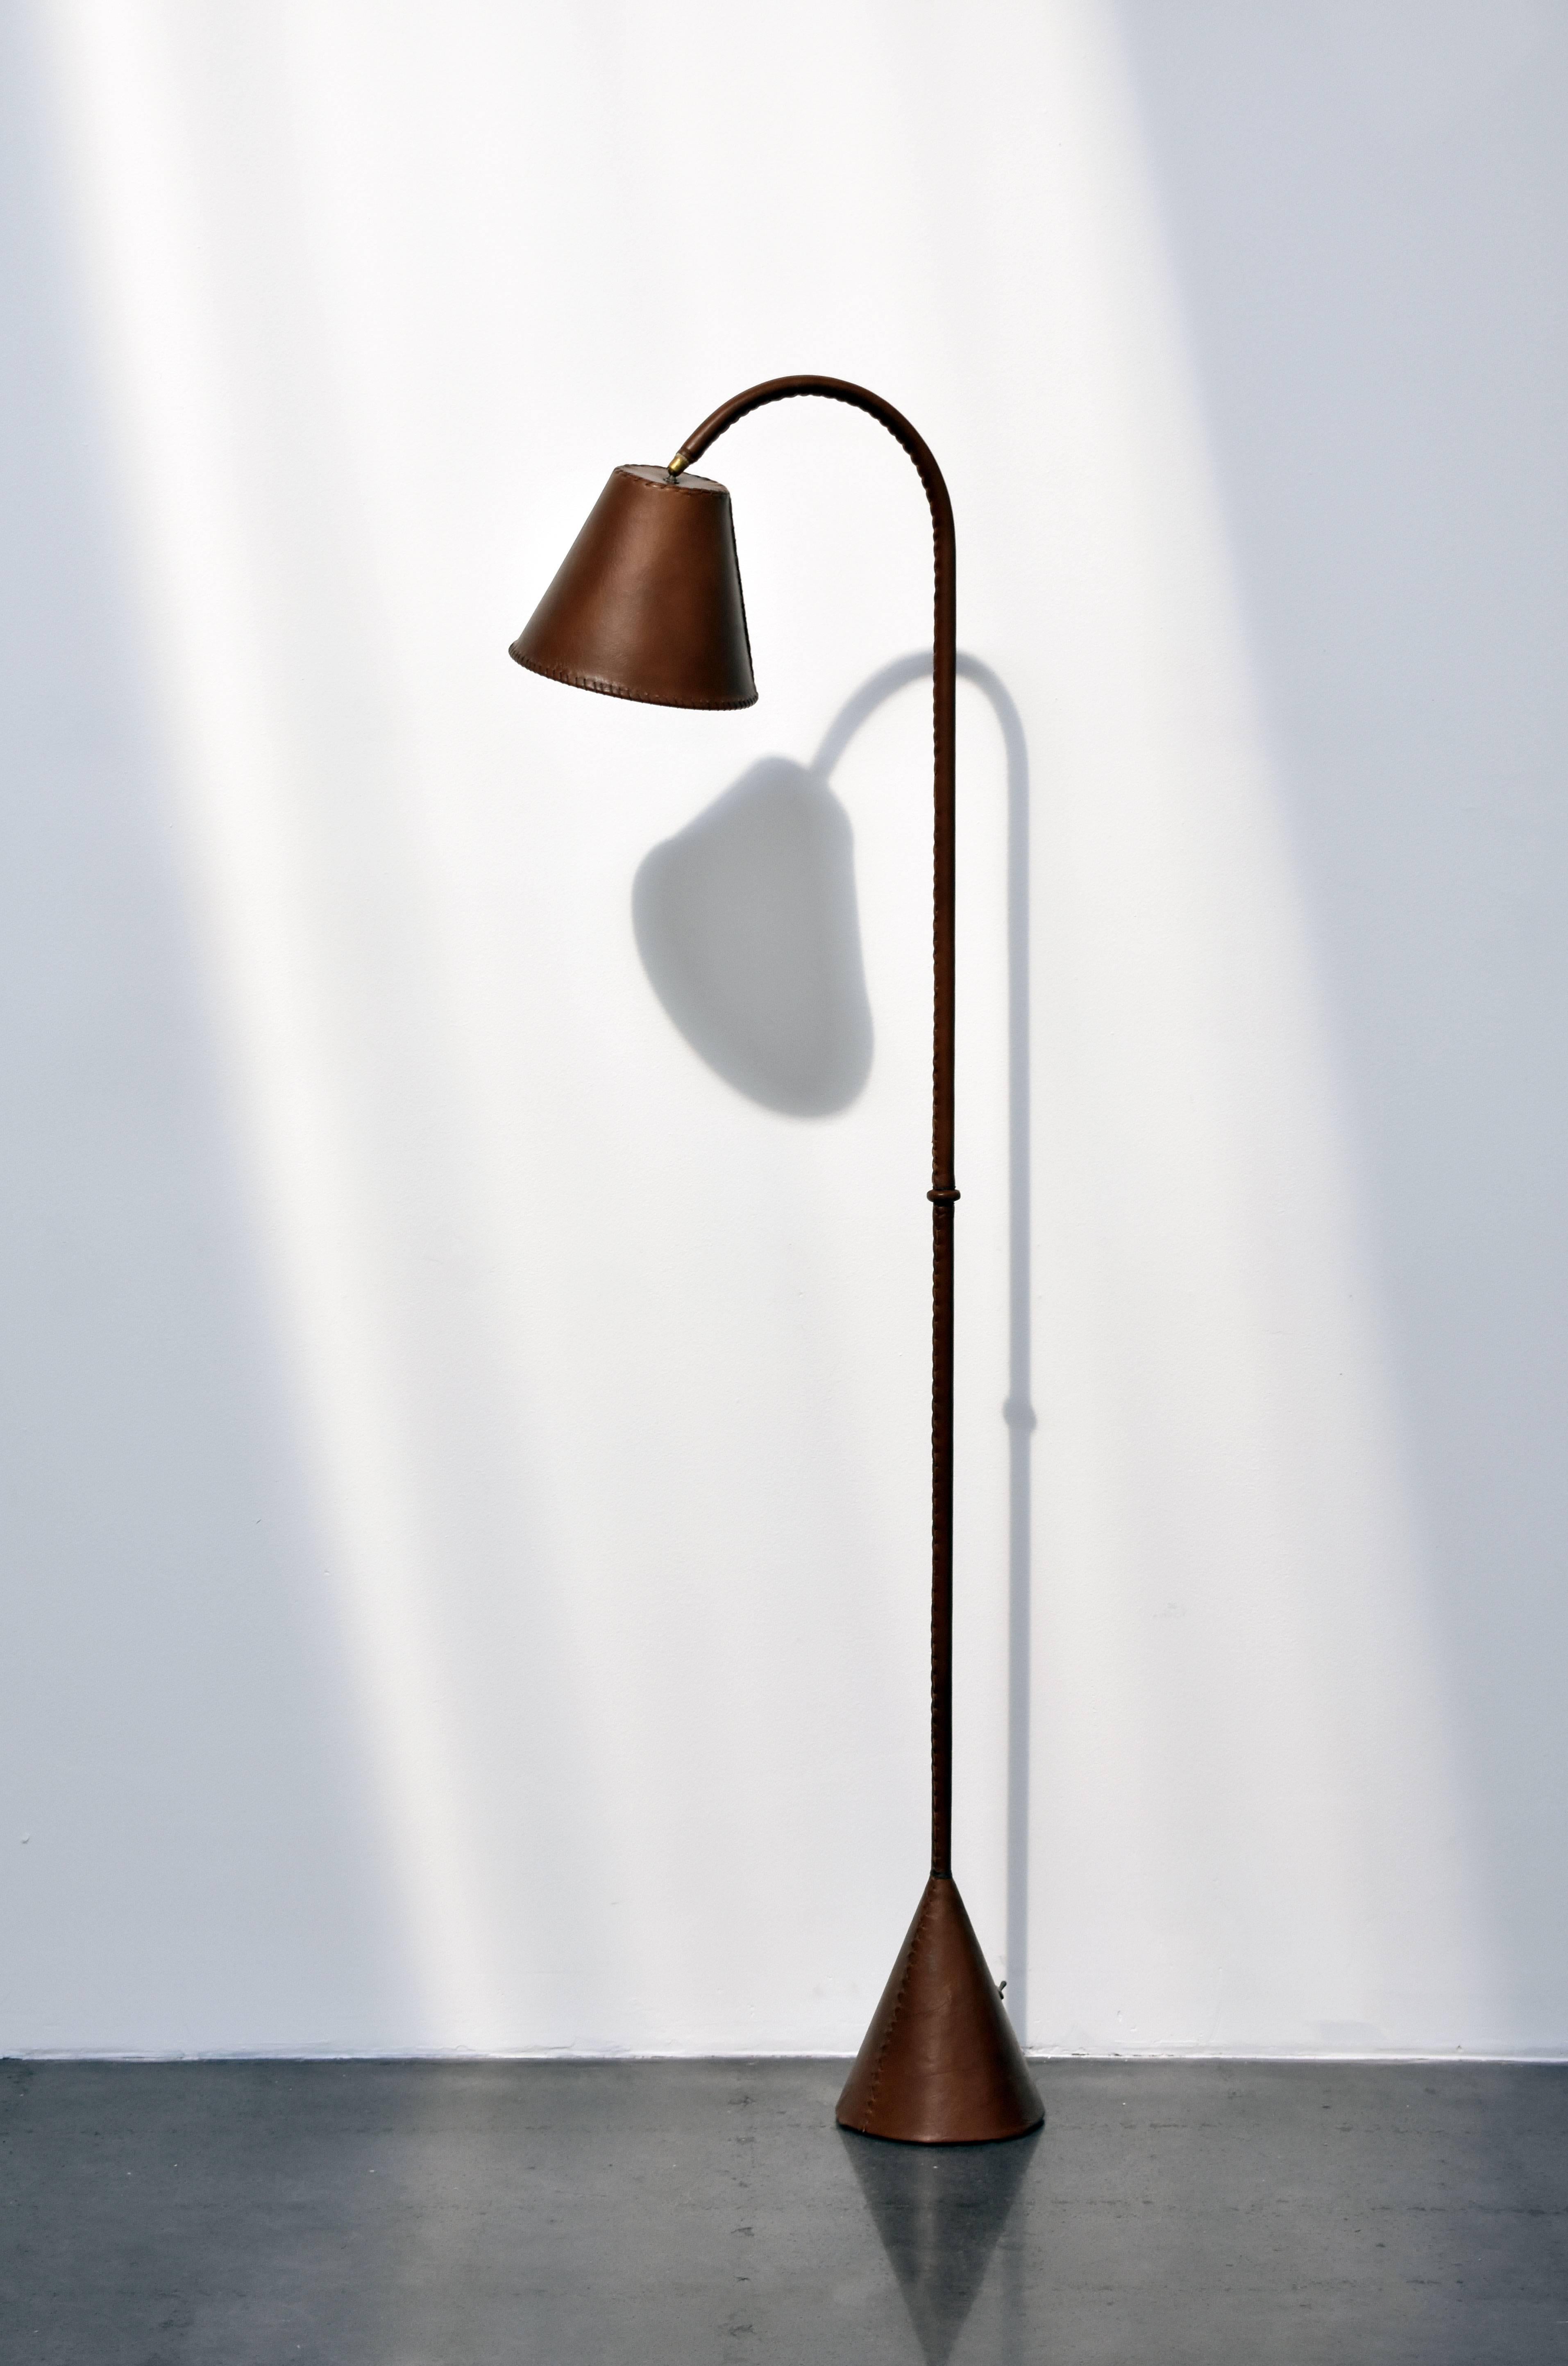 A French standing floor lamp. Manufactured in France, circa 1950. Lavishly clad entirely in saddle-stitched leather.